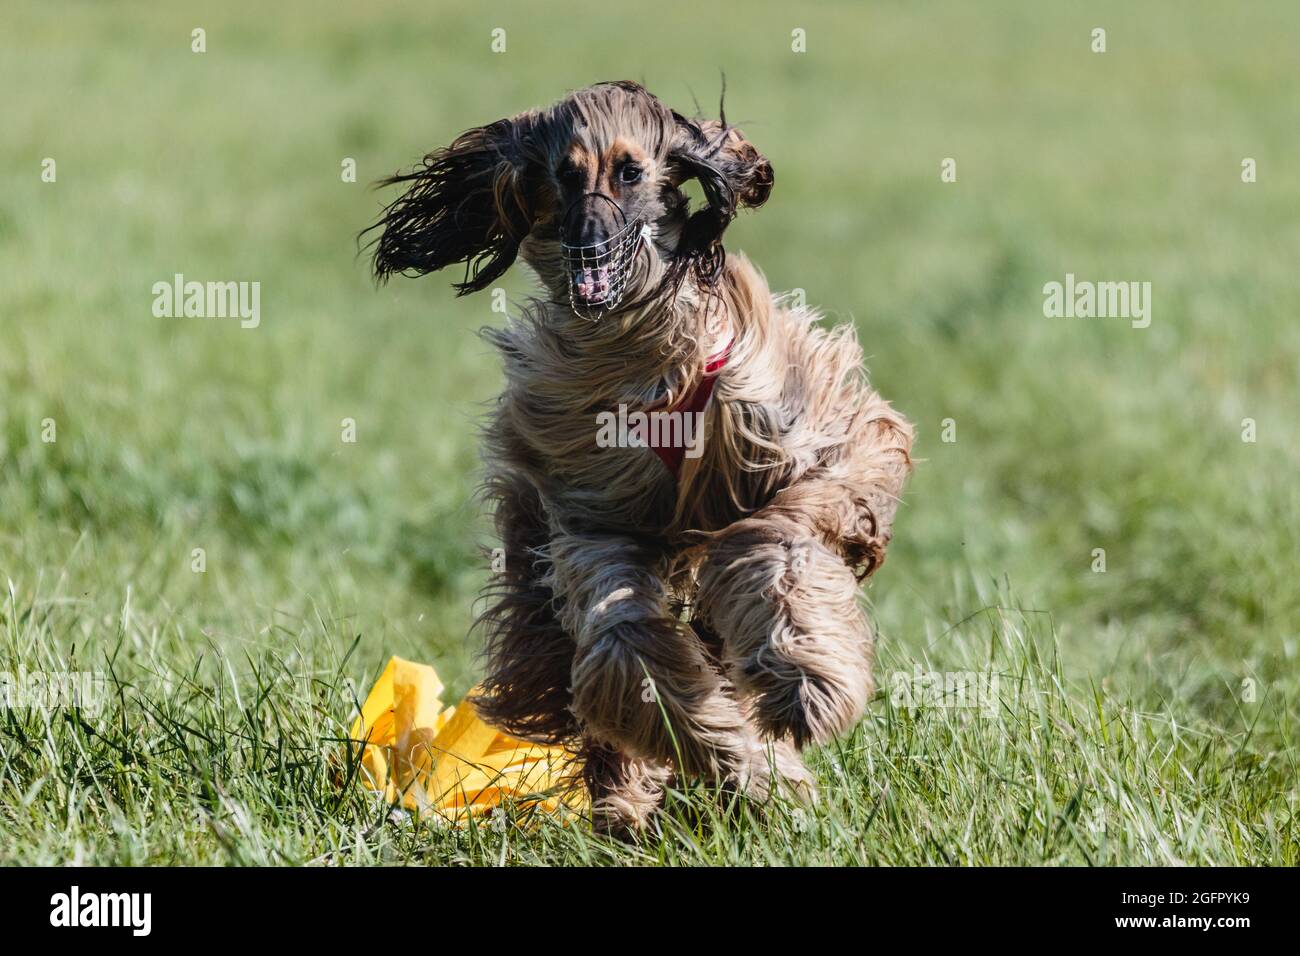 afghan borzoi dog running lure coursing competition on green field Stock Photo